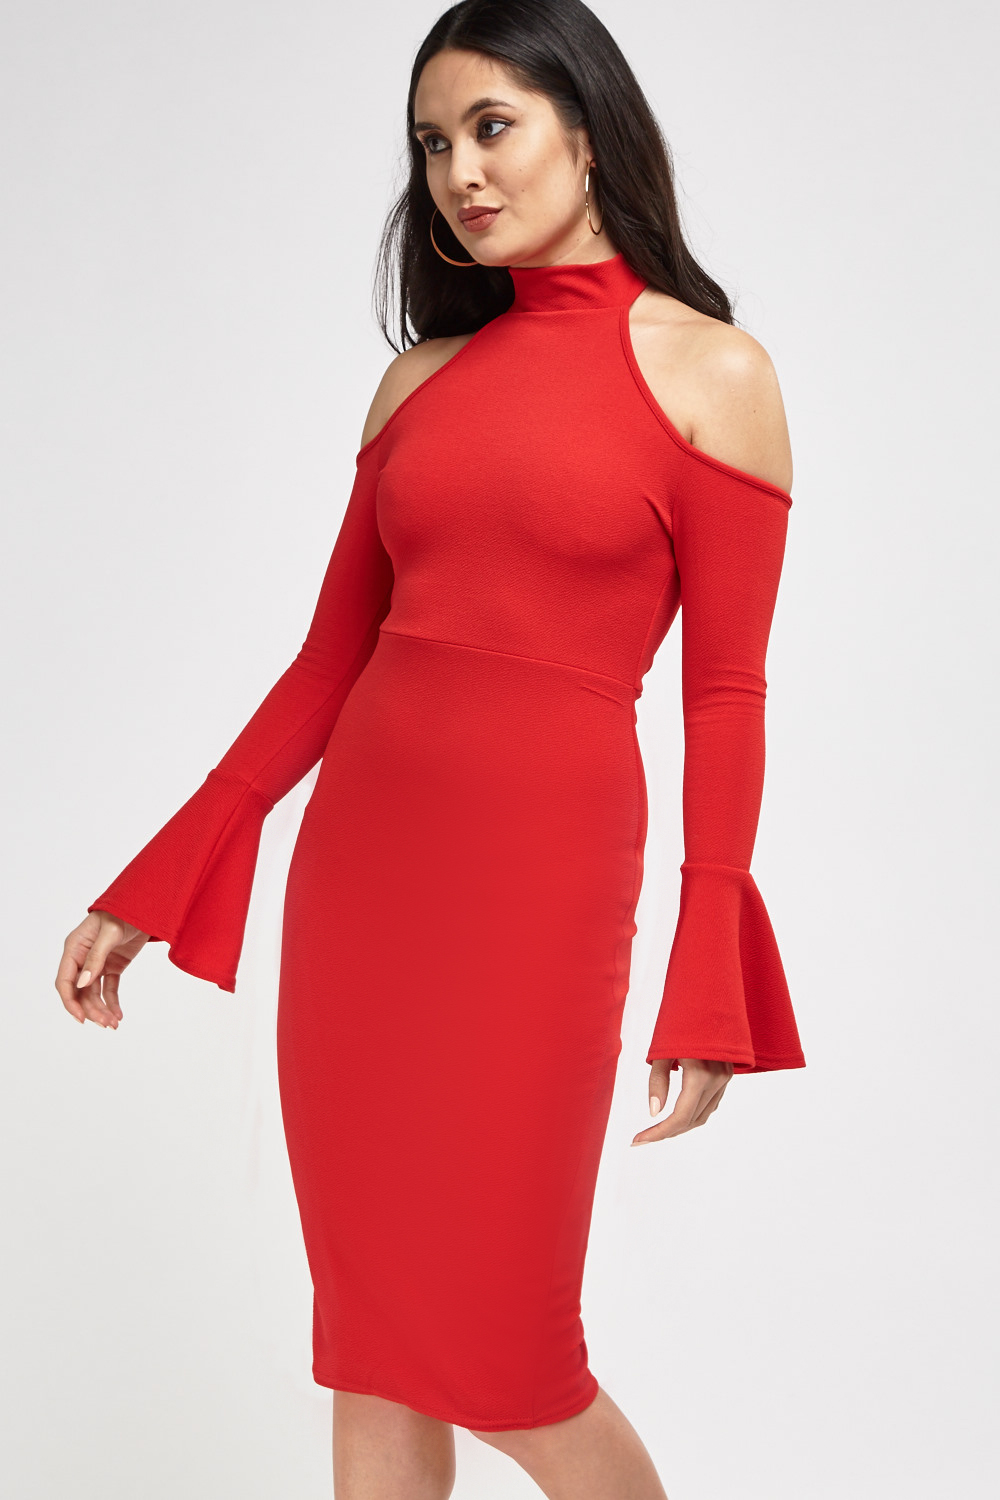 Red Cut Out Shoulder Midi Dress - Just $7